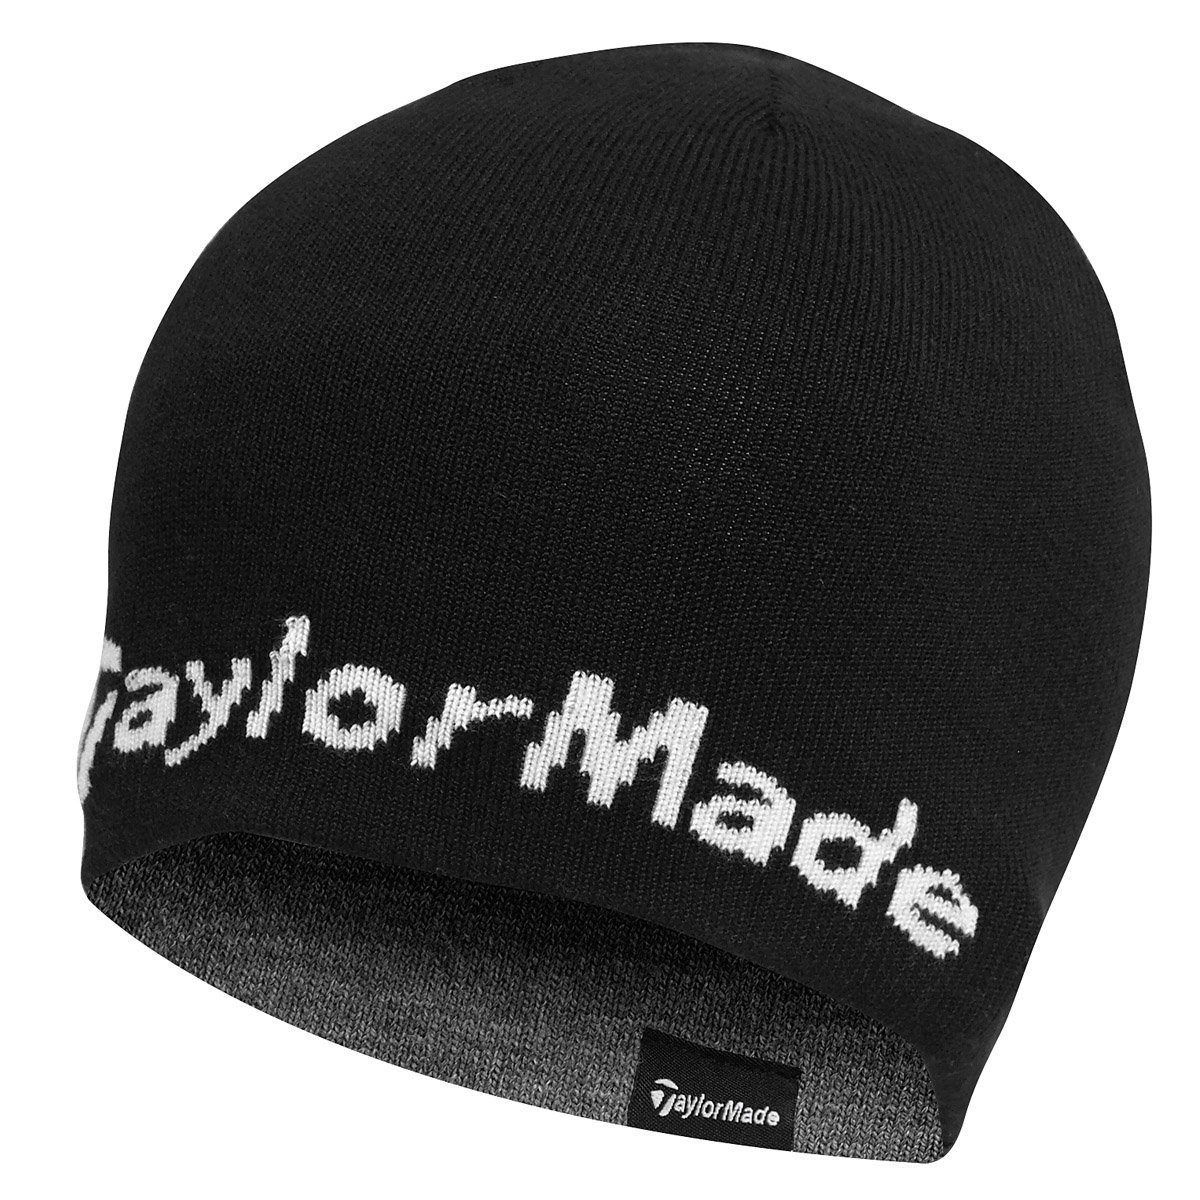 Taylormade Mens Reversible Thermal Golf Beanie Hats